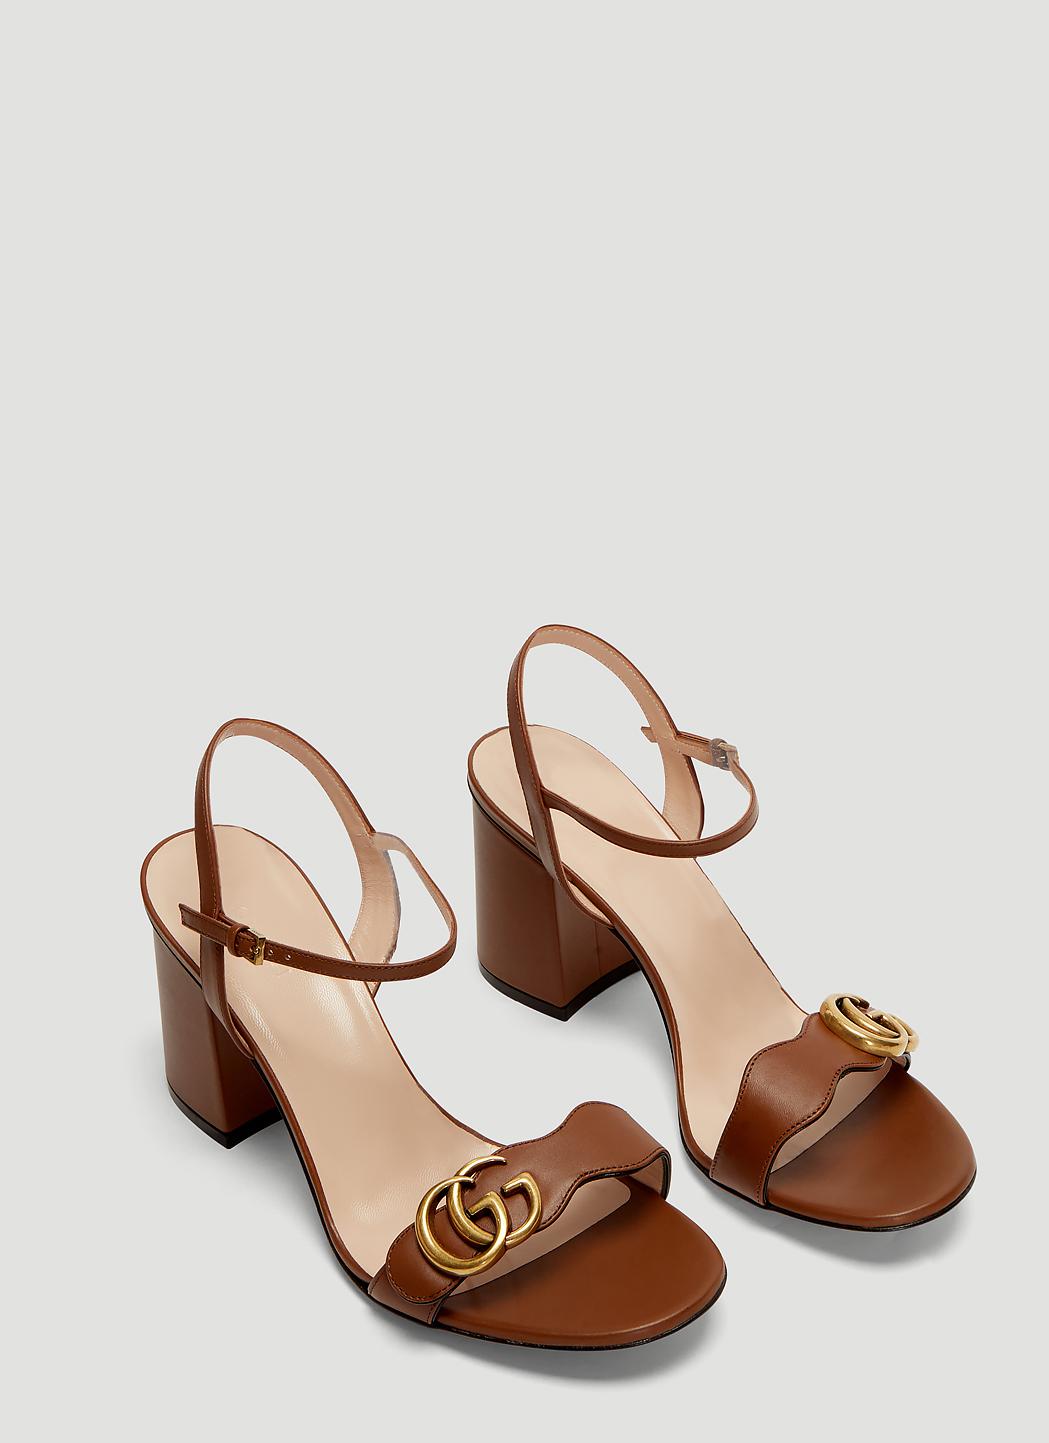 Gucci Leather GG 75 Marmont Sandals In Brown - Lyst